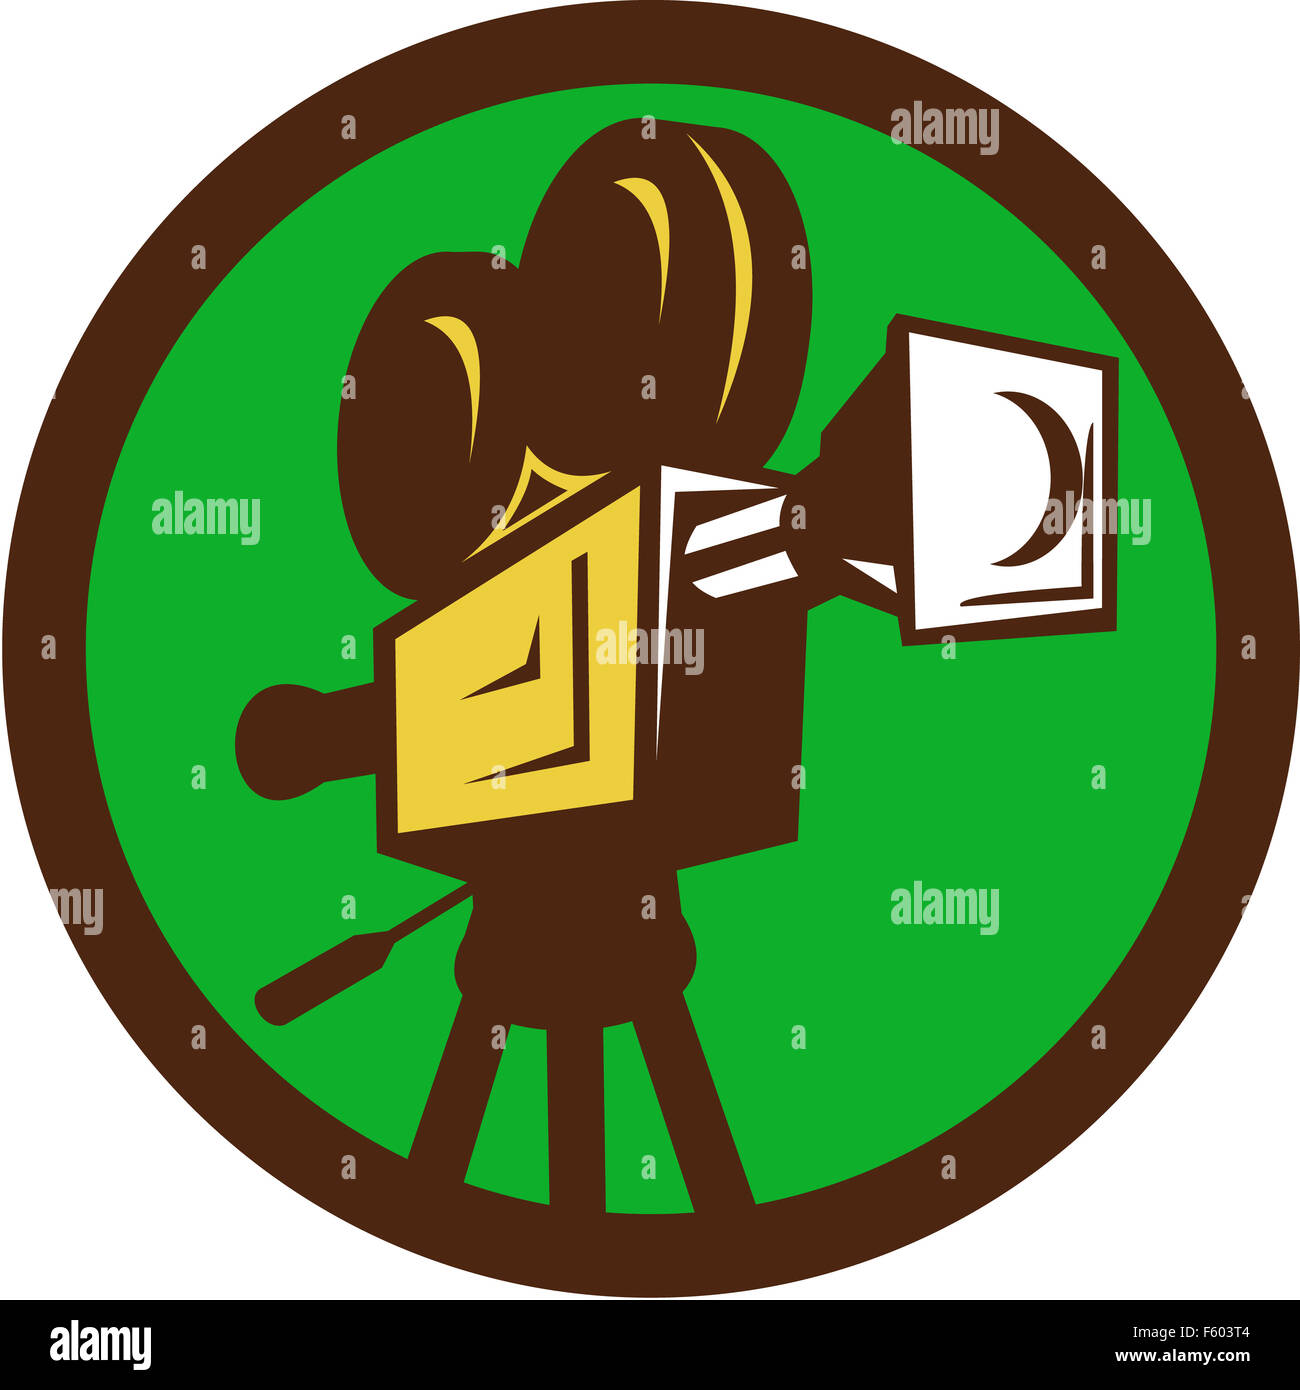 Illustration of a vintage movie film motion-picture camera set inside set inside circle on isolated background done in retro style. Stock Photo